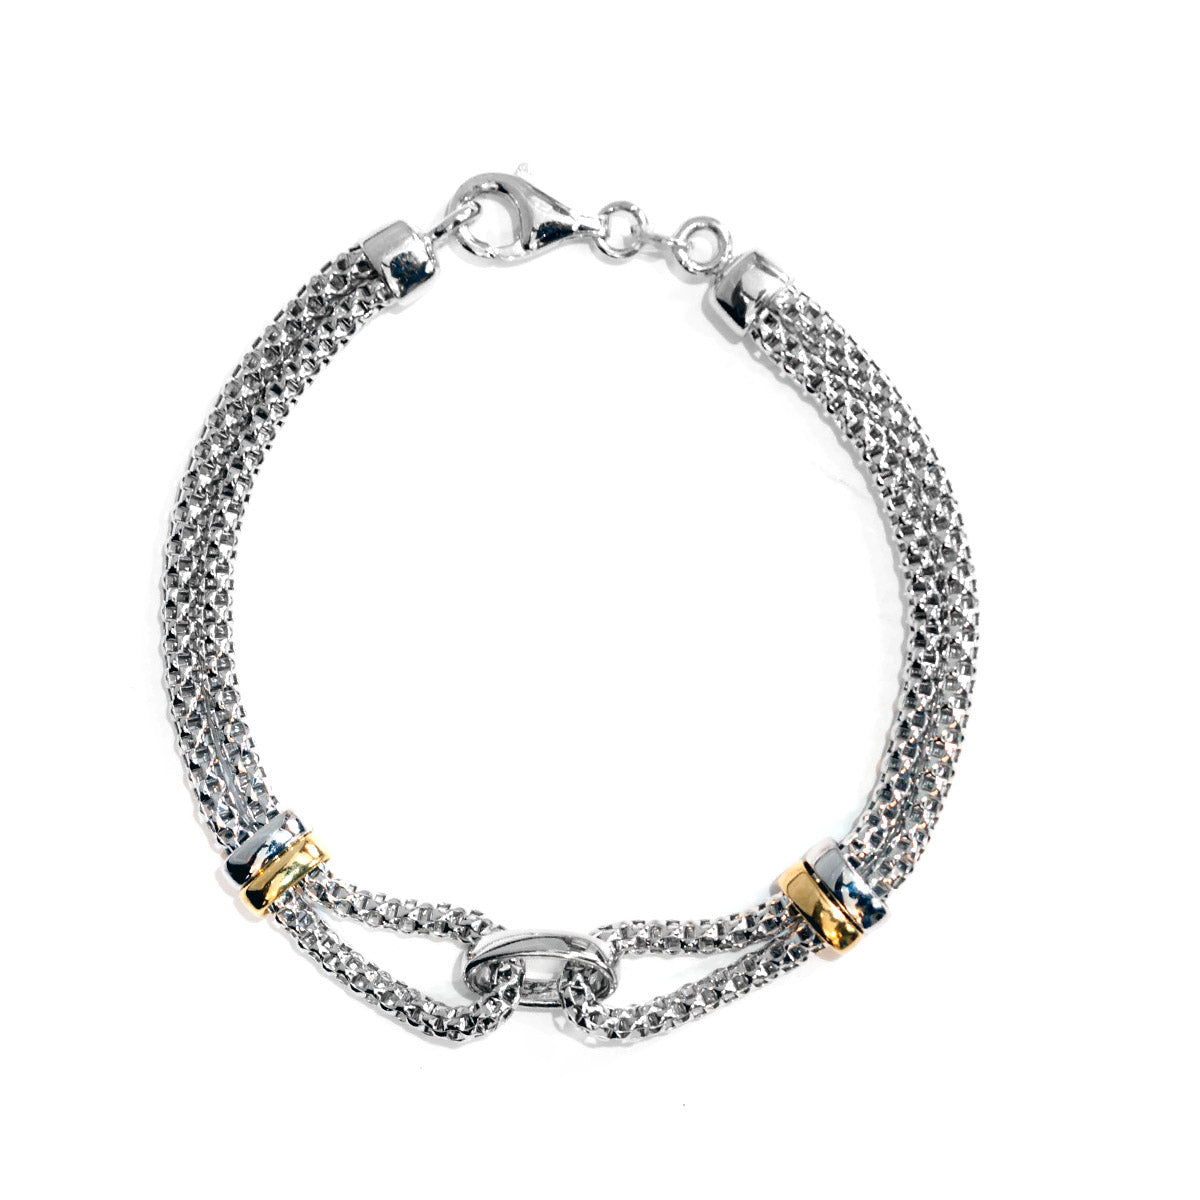 Rebecca Sloane Silver Popcorn Bracelet with Two Tone Bands